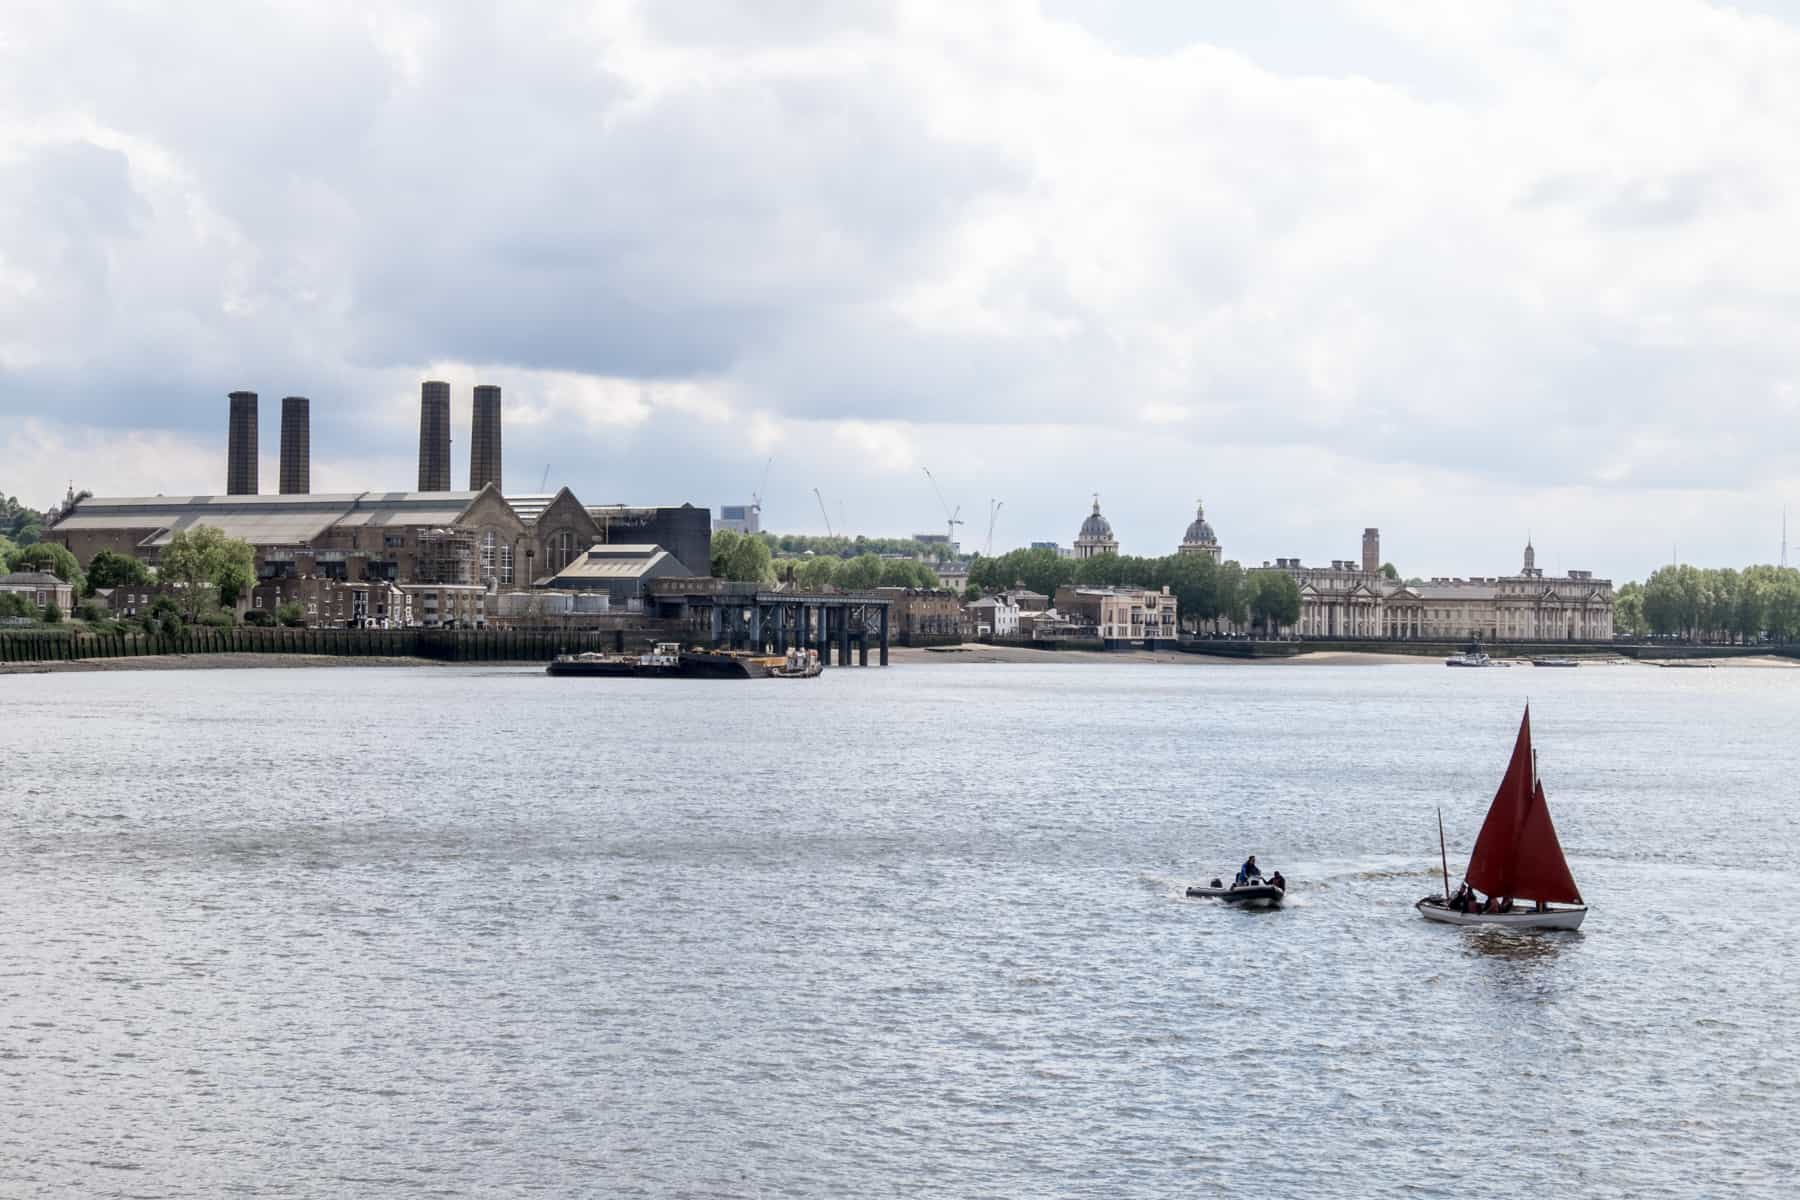 A red sail boat and small dingy boat on the River Thames in front of the coastline with Greenwich Power Station and Royal Greenwich domes and buildings. 